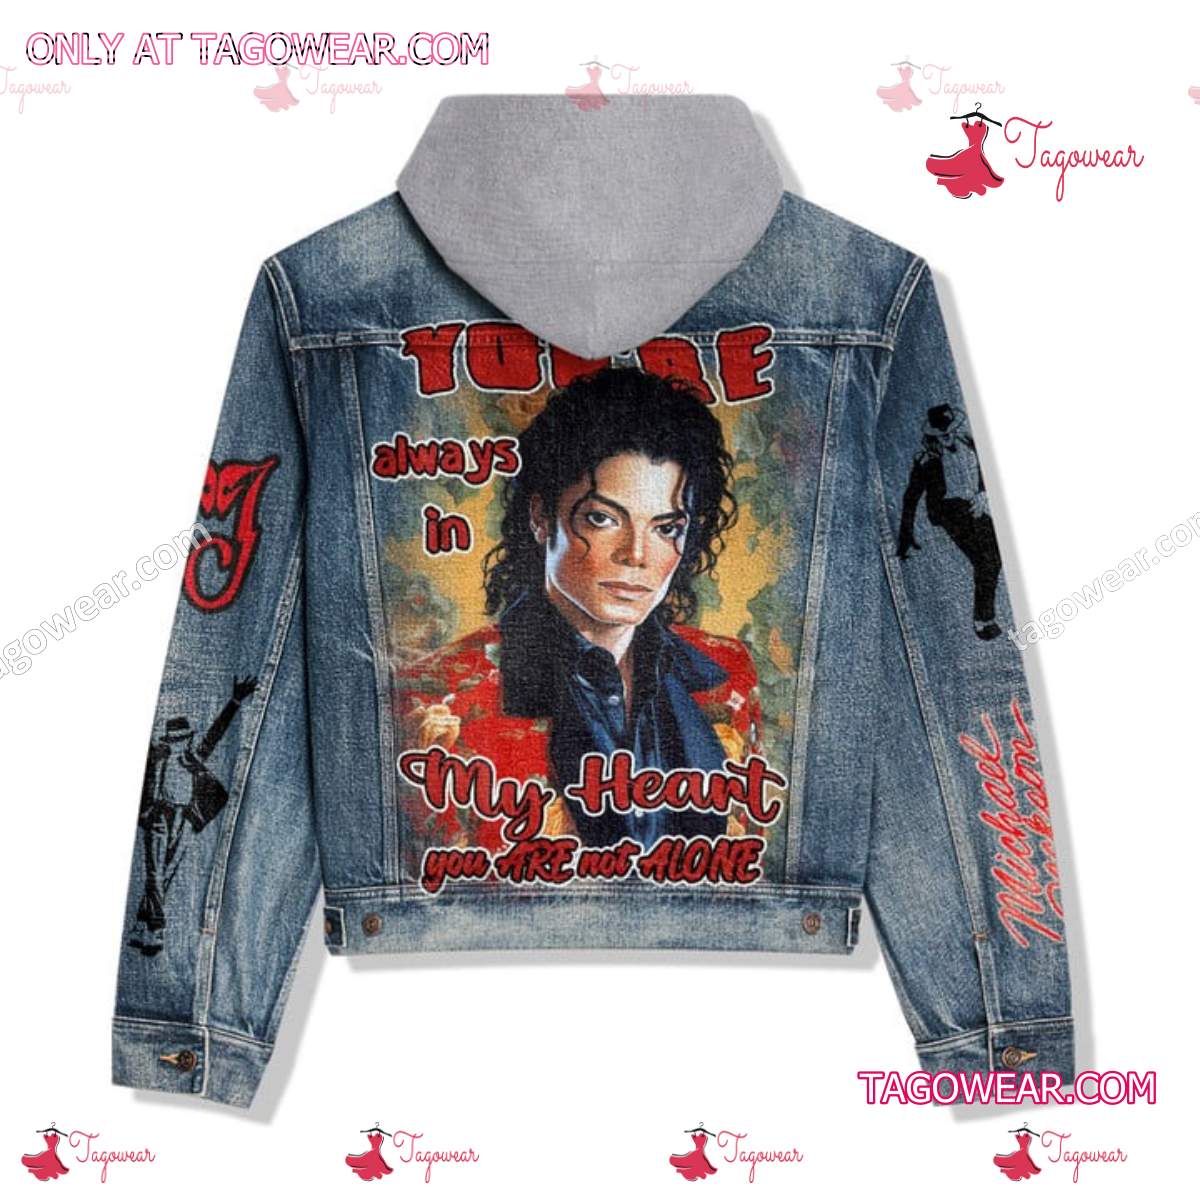 Michael Jackson You're Always In My Heart You Are Not Alone Jean Jacket Hoodie a